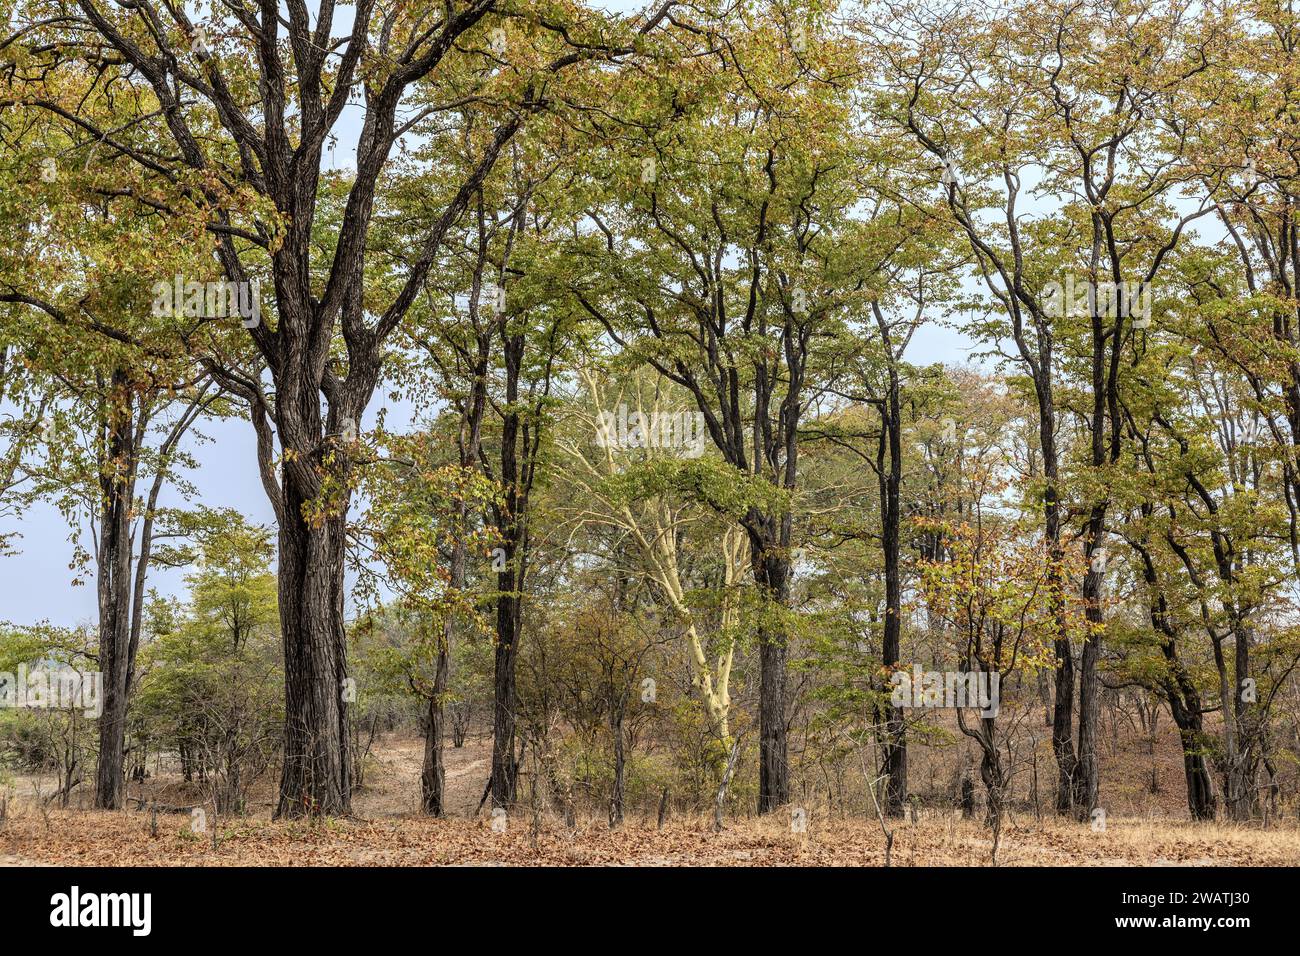 Mopani forest & Fever tree,  Liwonde National Park, Malawi. Mopani means butterfly due to leaf shape. Stock Photo